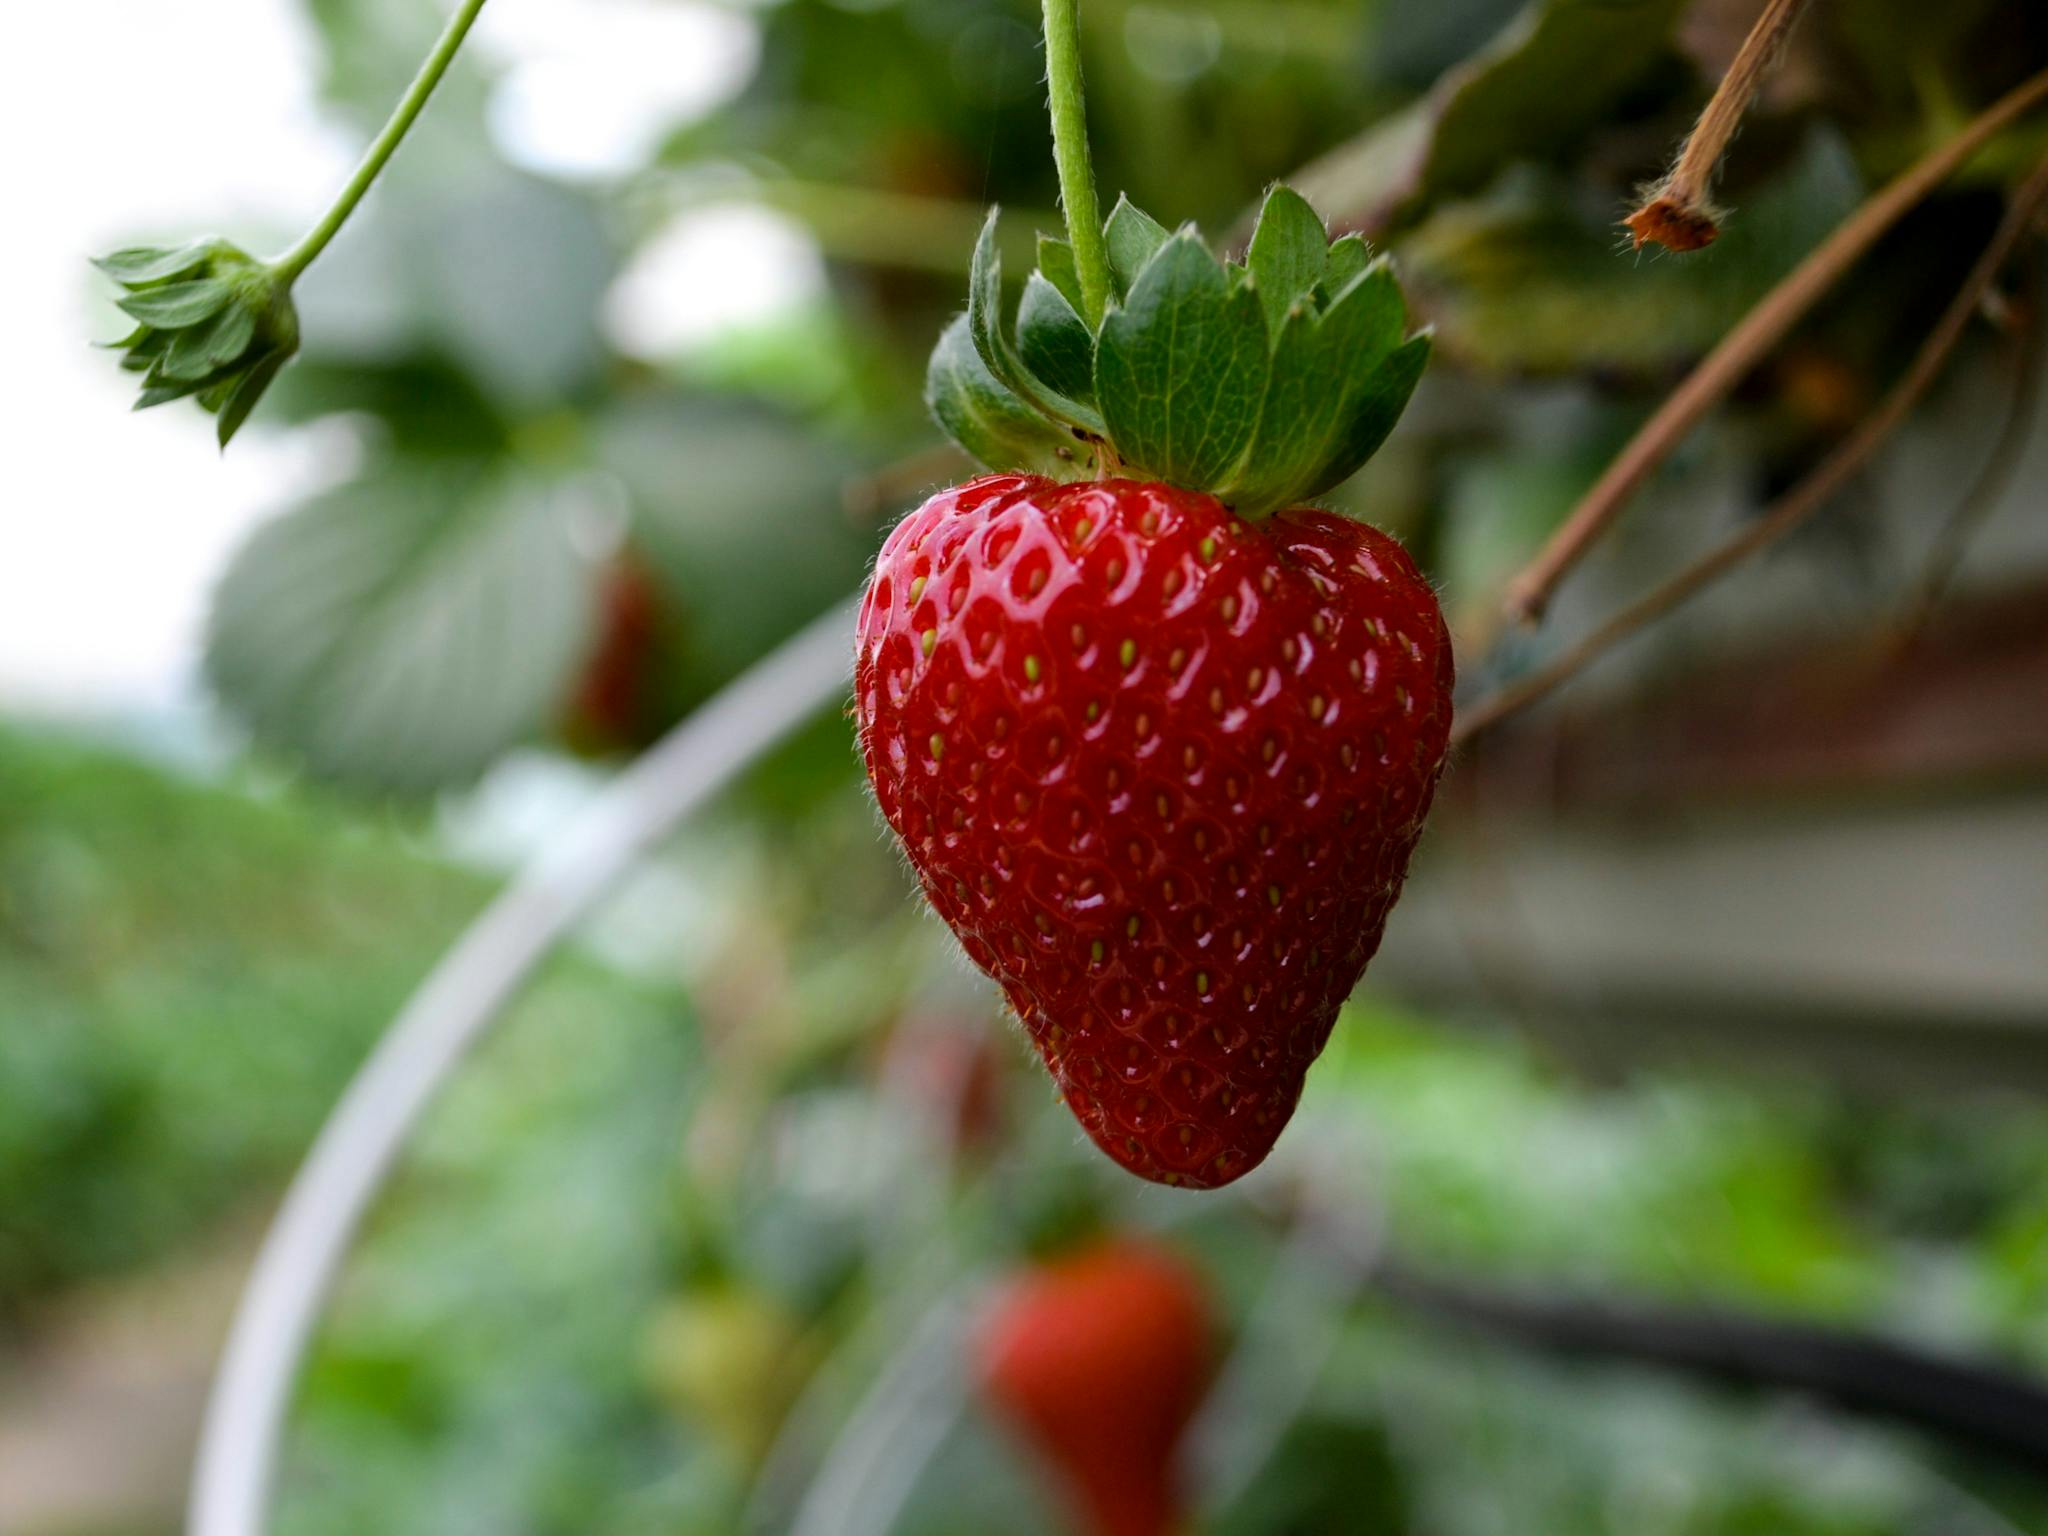 A beautiful ripe strawberry hanging off a plant